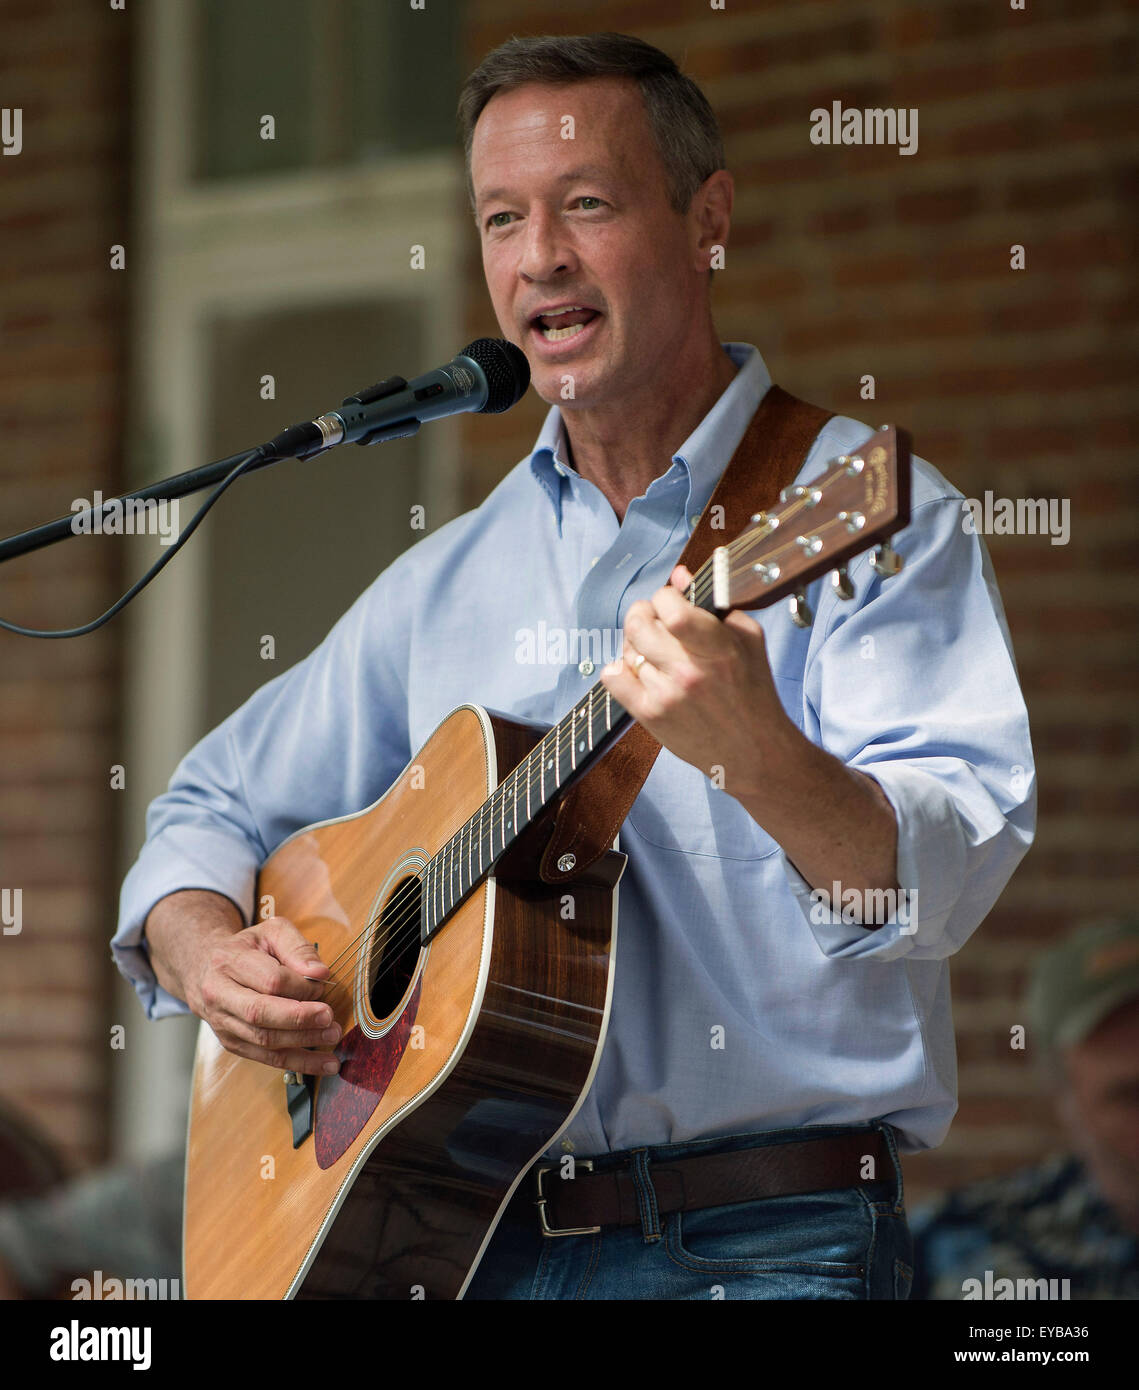 July 25, 2015 - Winterset, Iowa, U.S. -  Former Maryland governor and 2016 presidential candidate MARTIN O'MALLEY entertains the crowd after his stump speech during the Summer Wine Down held at the Madison County Historical Complex.(Credit Image: © Brian Cahn via ZUMA Wire) Stock Photo